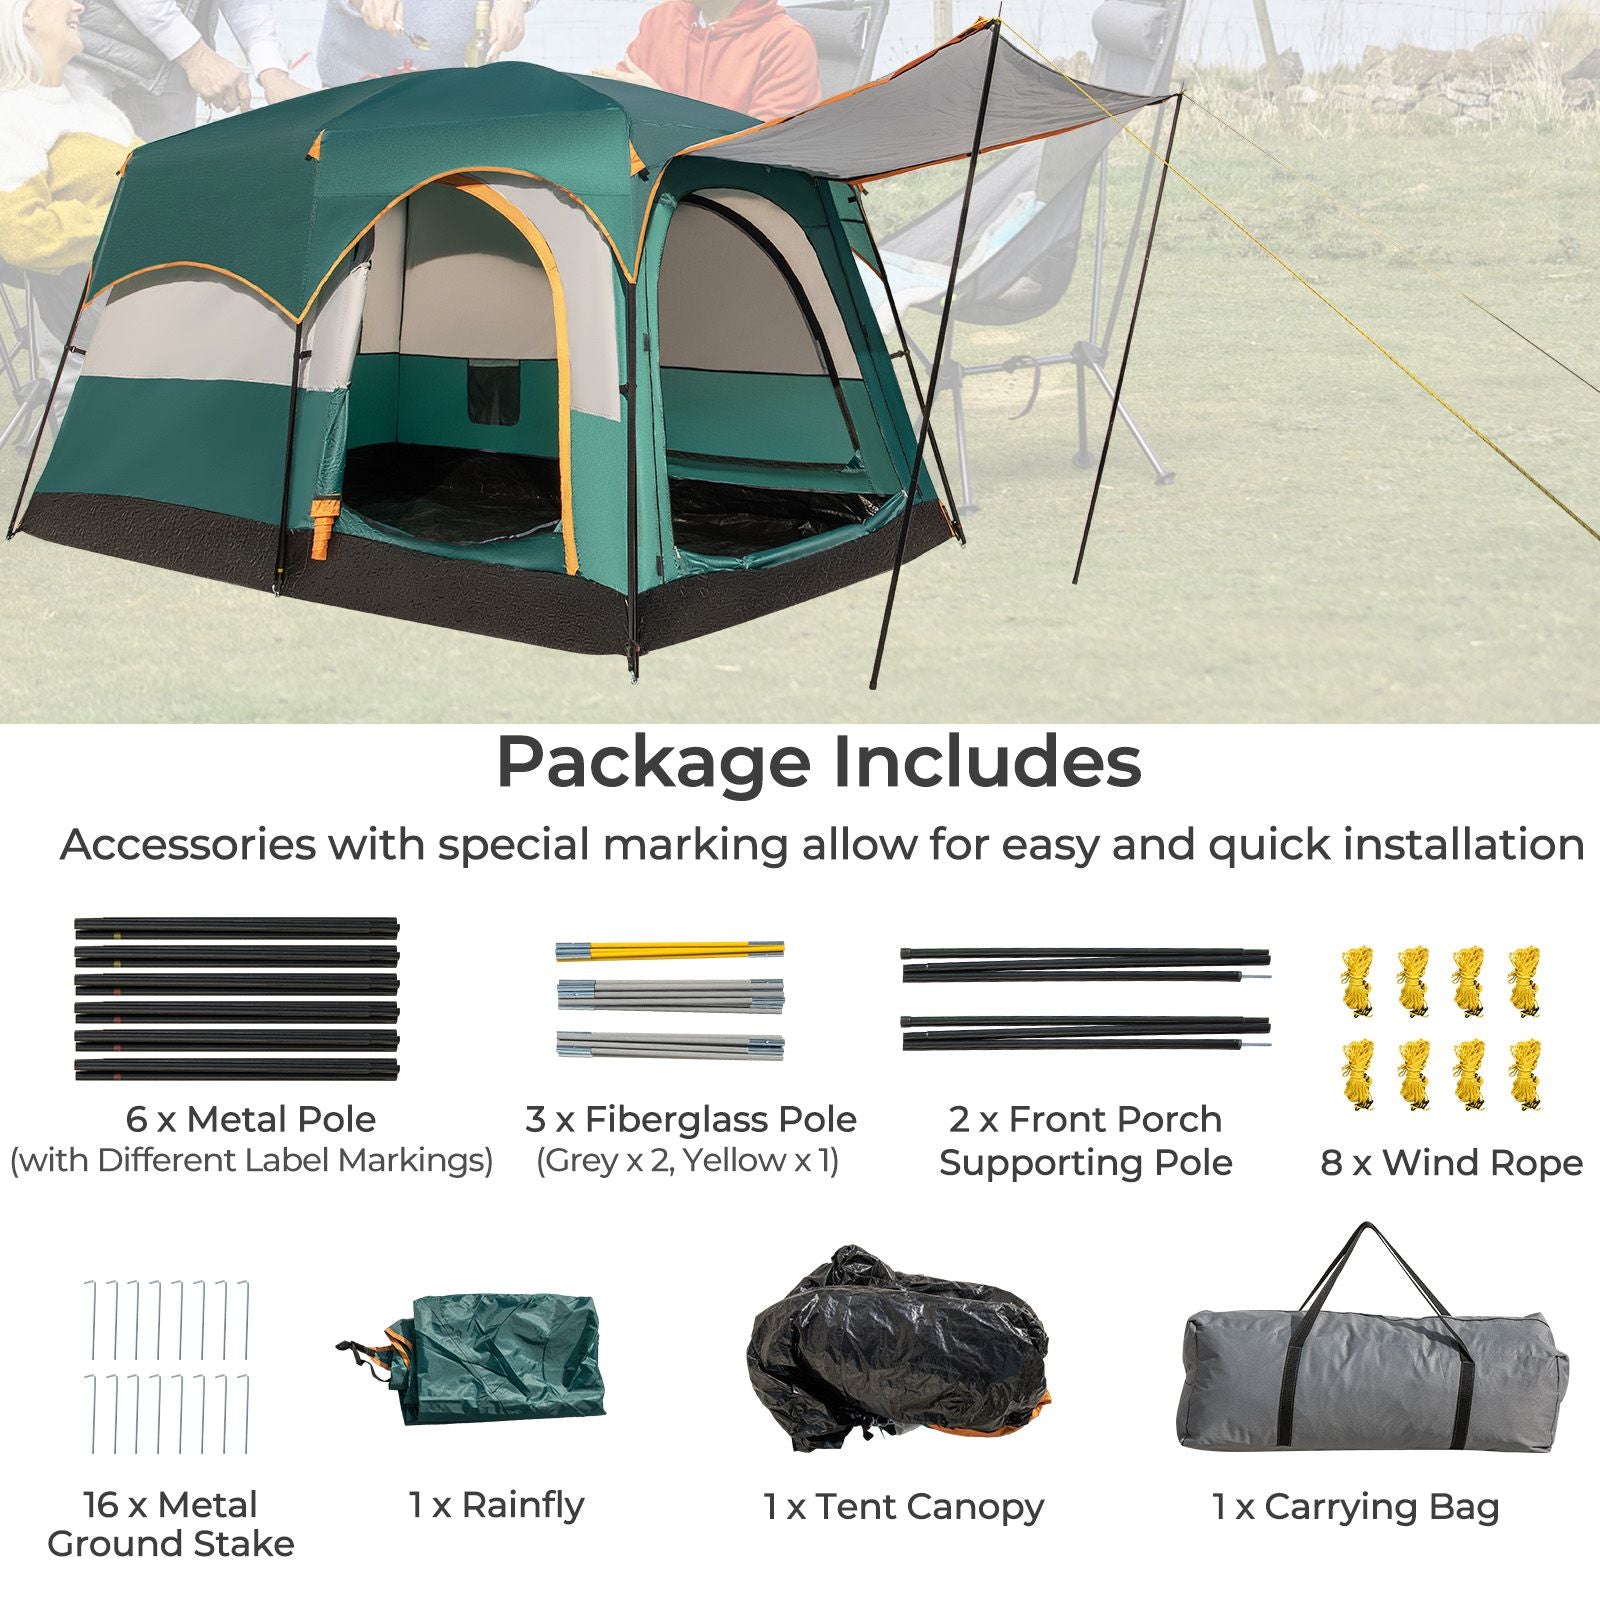 Large 6 Person Camping Tent featuring 2 Room Dividers!